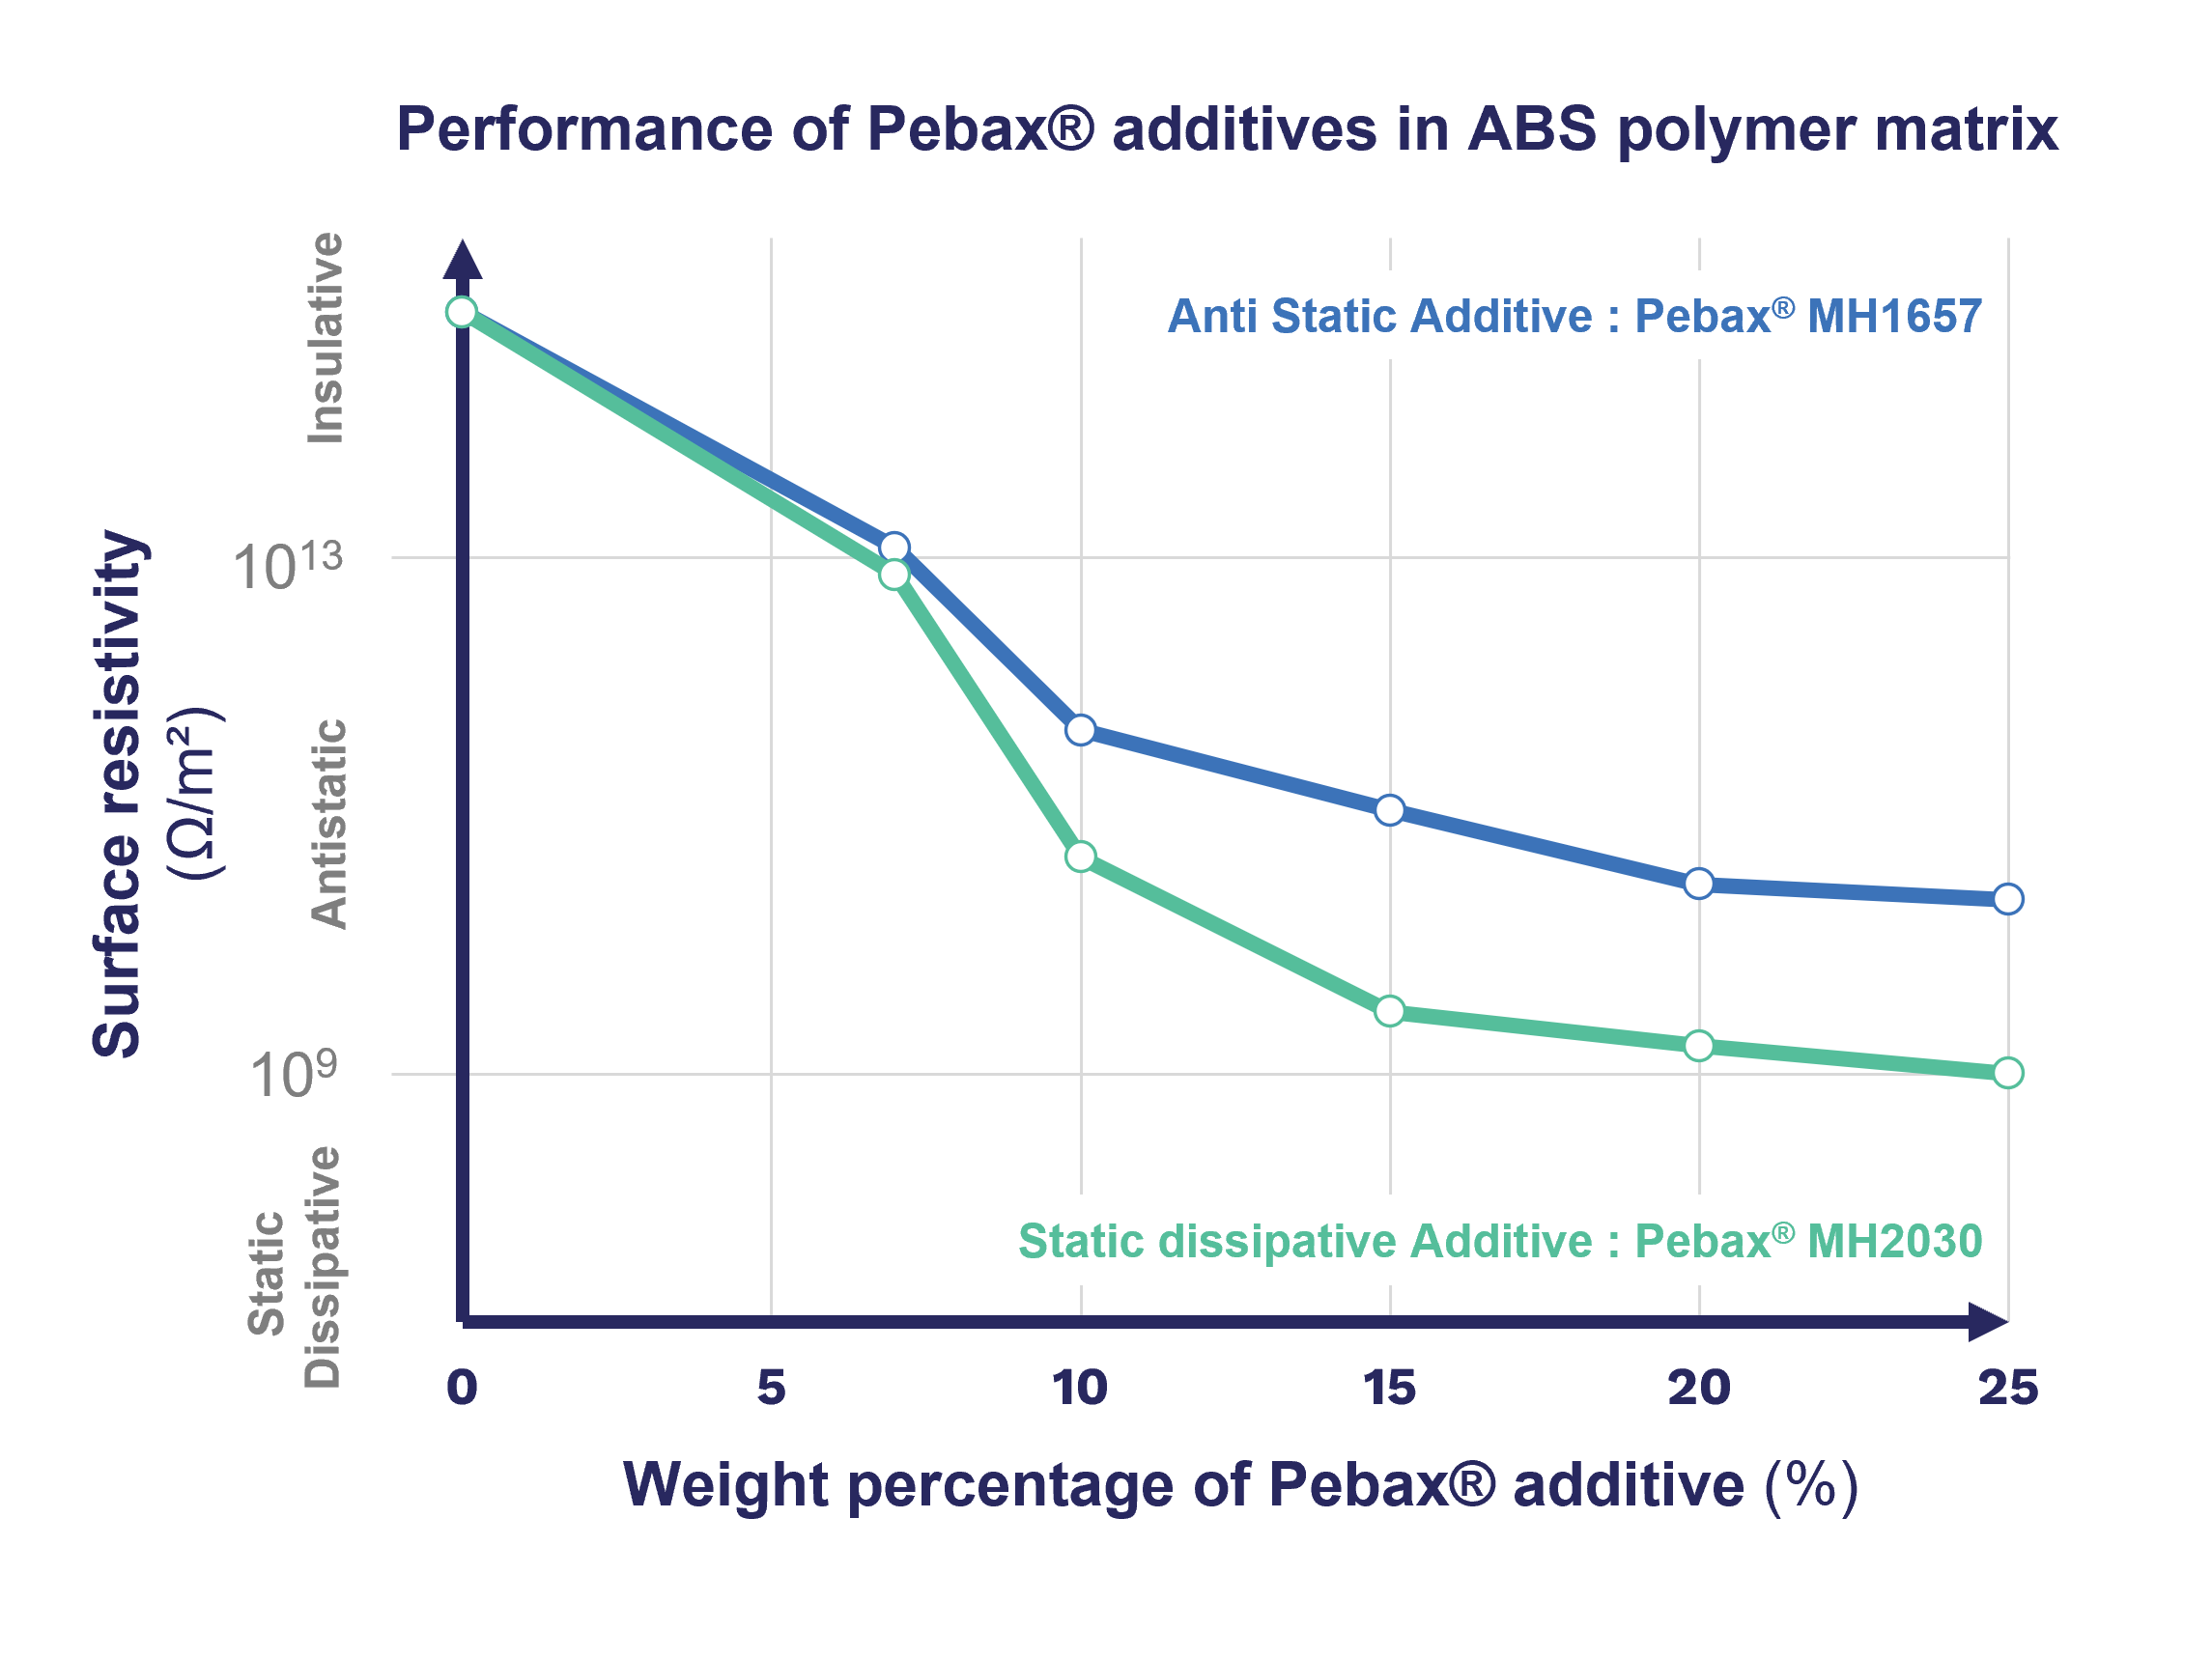 Plot of the antistatic performance of two Pebax antistatic additives versus the amount of additive used. It shows both antistatic and static dissipative behaviors can be achieved with different Pebax grades